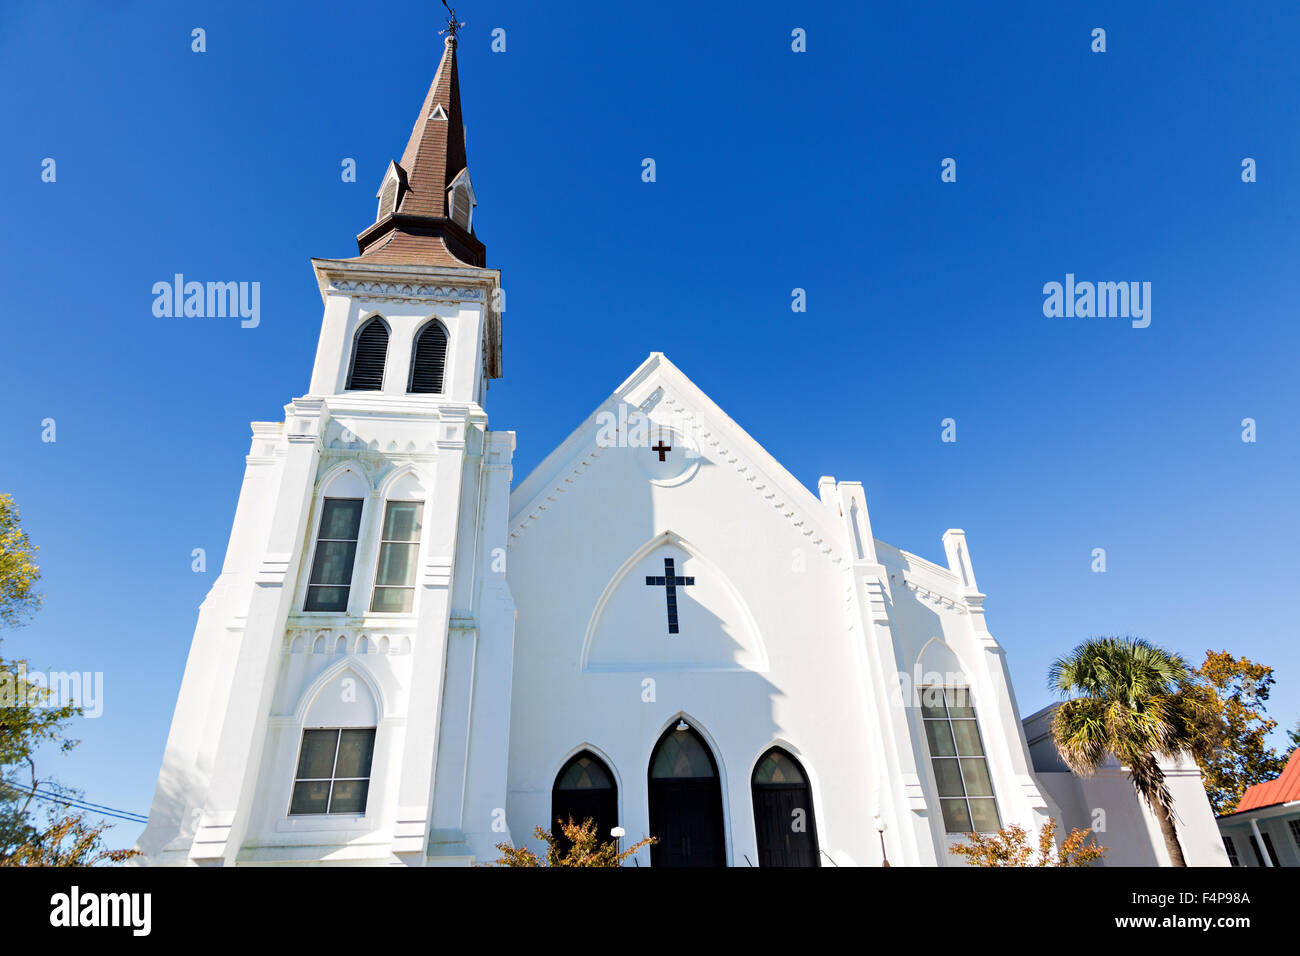 Historic Mother Emanuel African Methodist Episcopal Church October 21, 2015 in Charleston, South Carolina. The church was the site of the mass shooting that killed nine-people in June 2015. Stock Photo